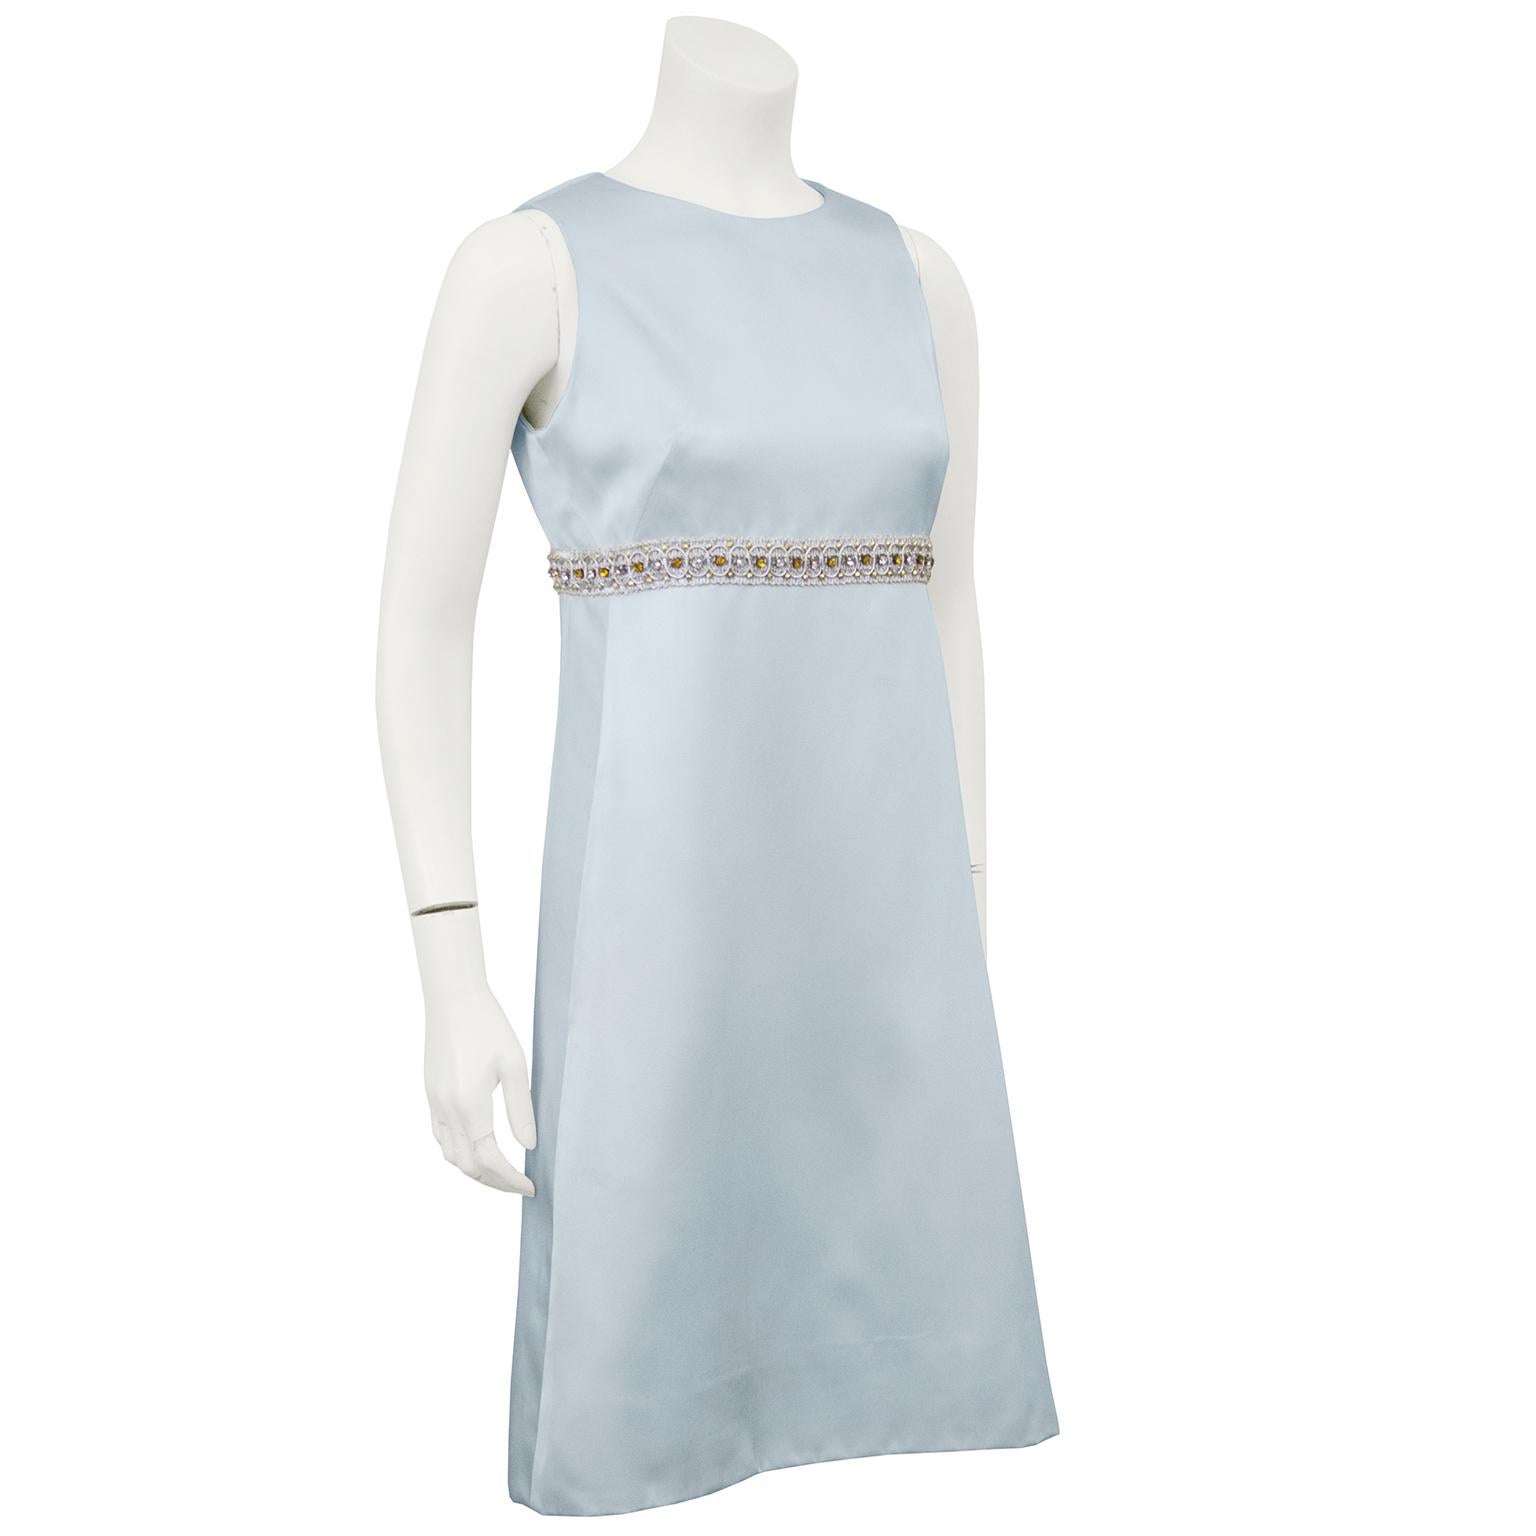 Beautiful ice blue A line cocktail dress from the 1960s by the Hong Kong based British clothing line Dynasty. Known for their beading techniques, this Dynasty piece has a lovely silver thread and rhinestone belt that is attached and accents the